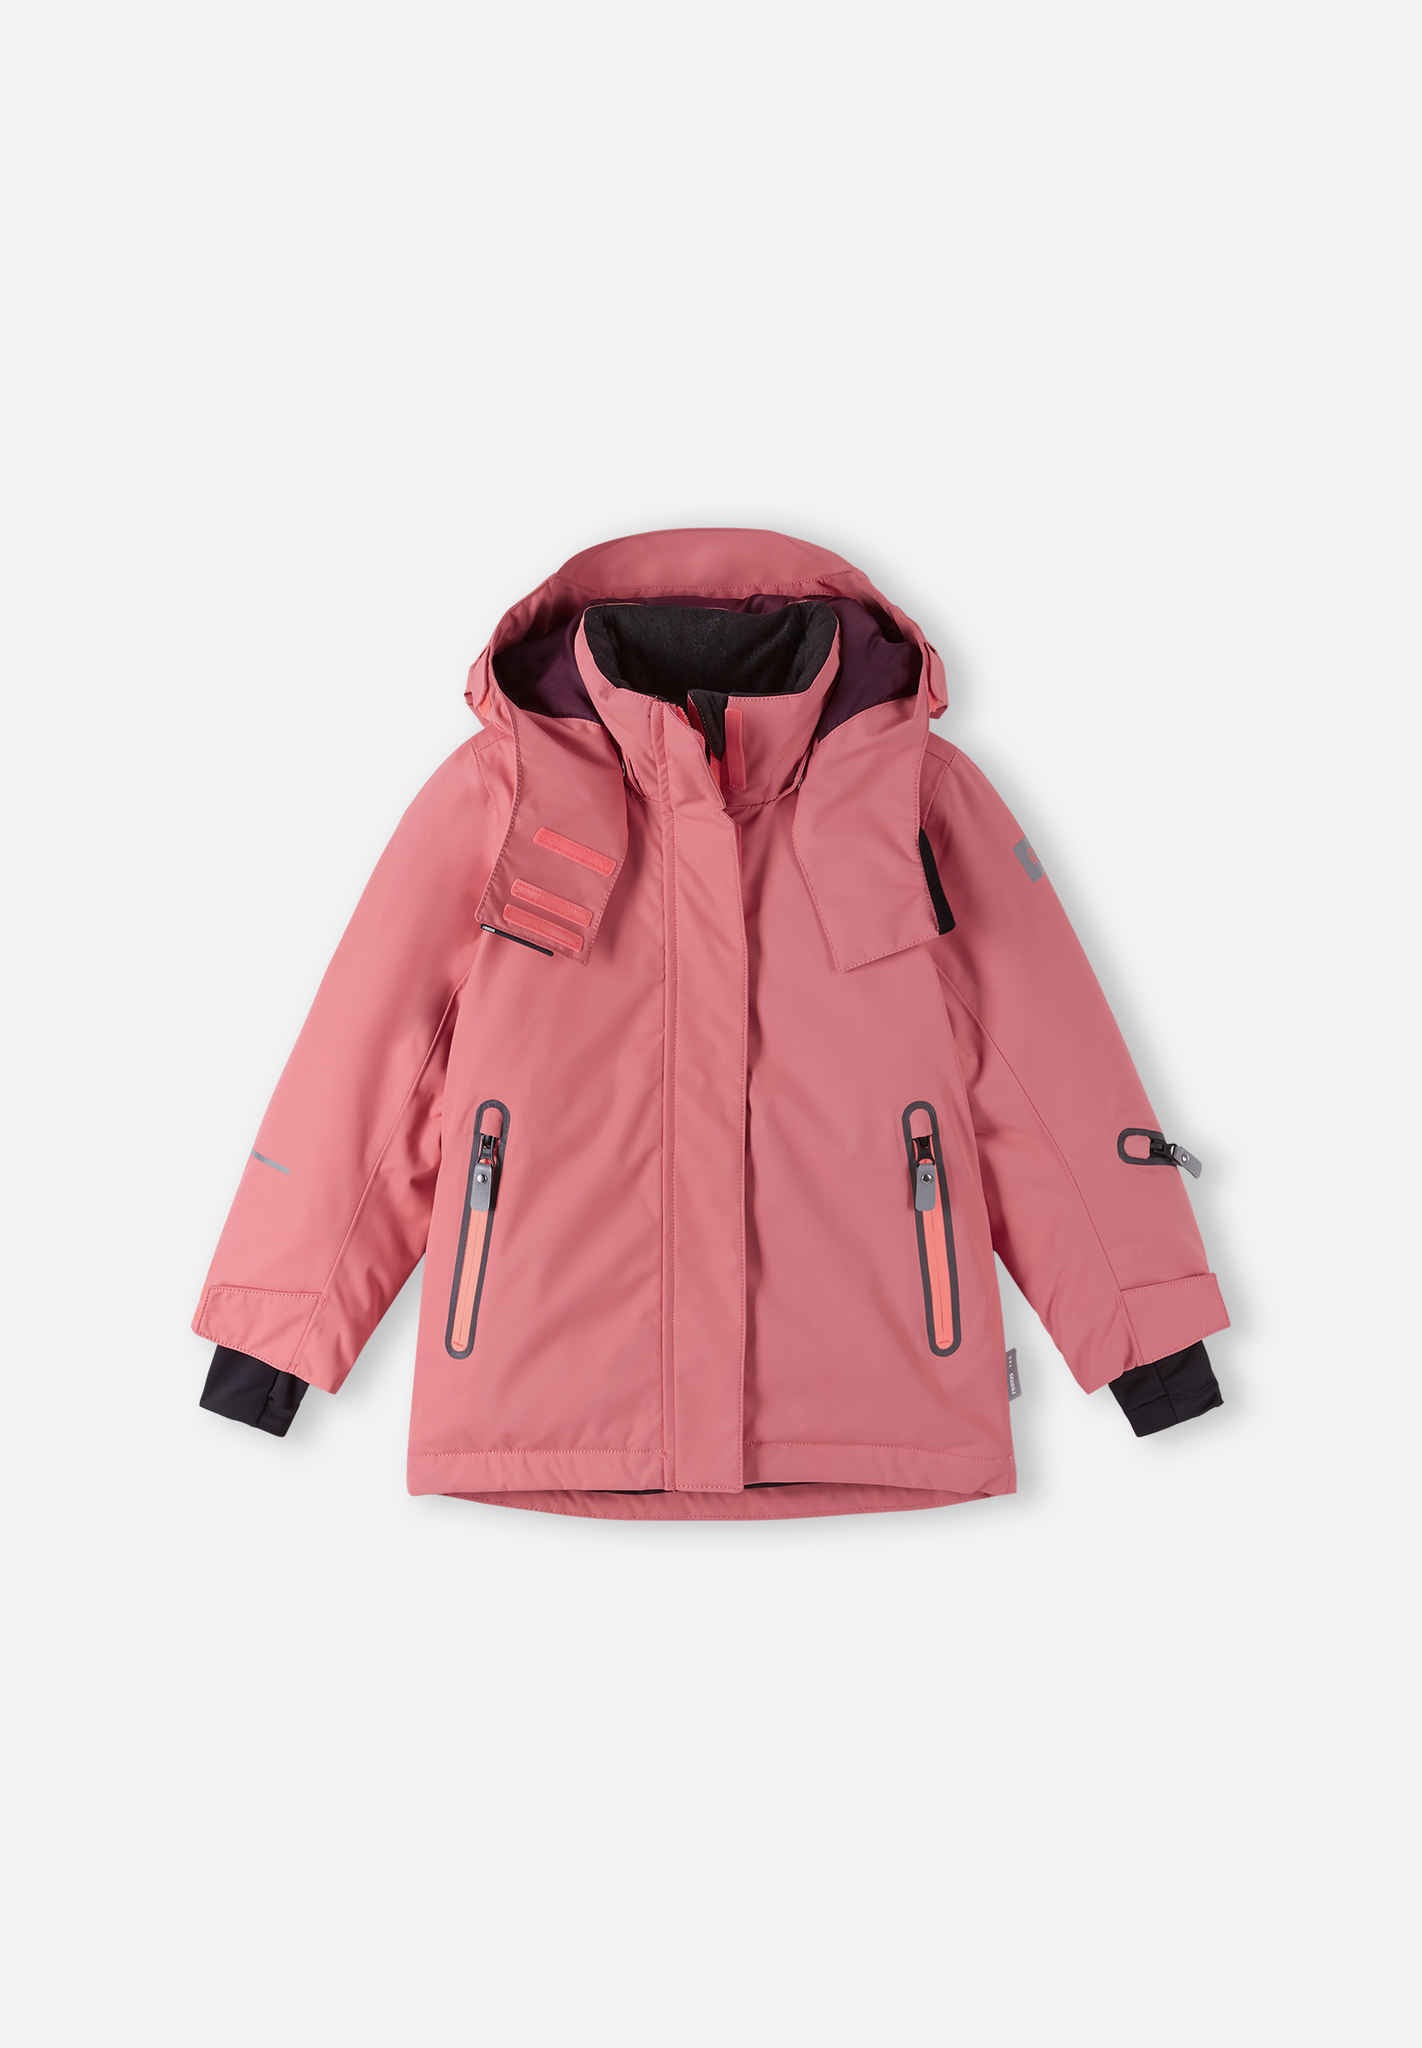 US Kids Durable Outerwear Shop Reima from